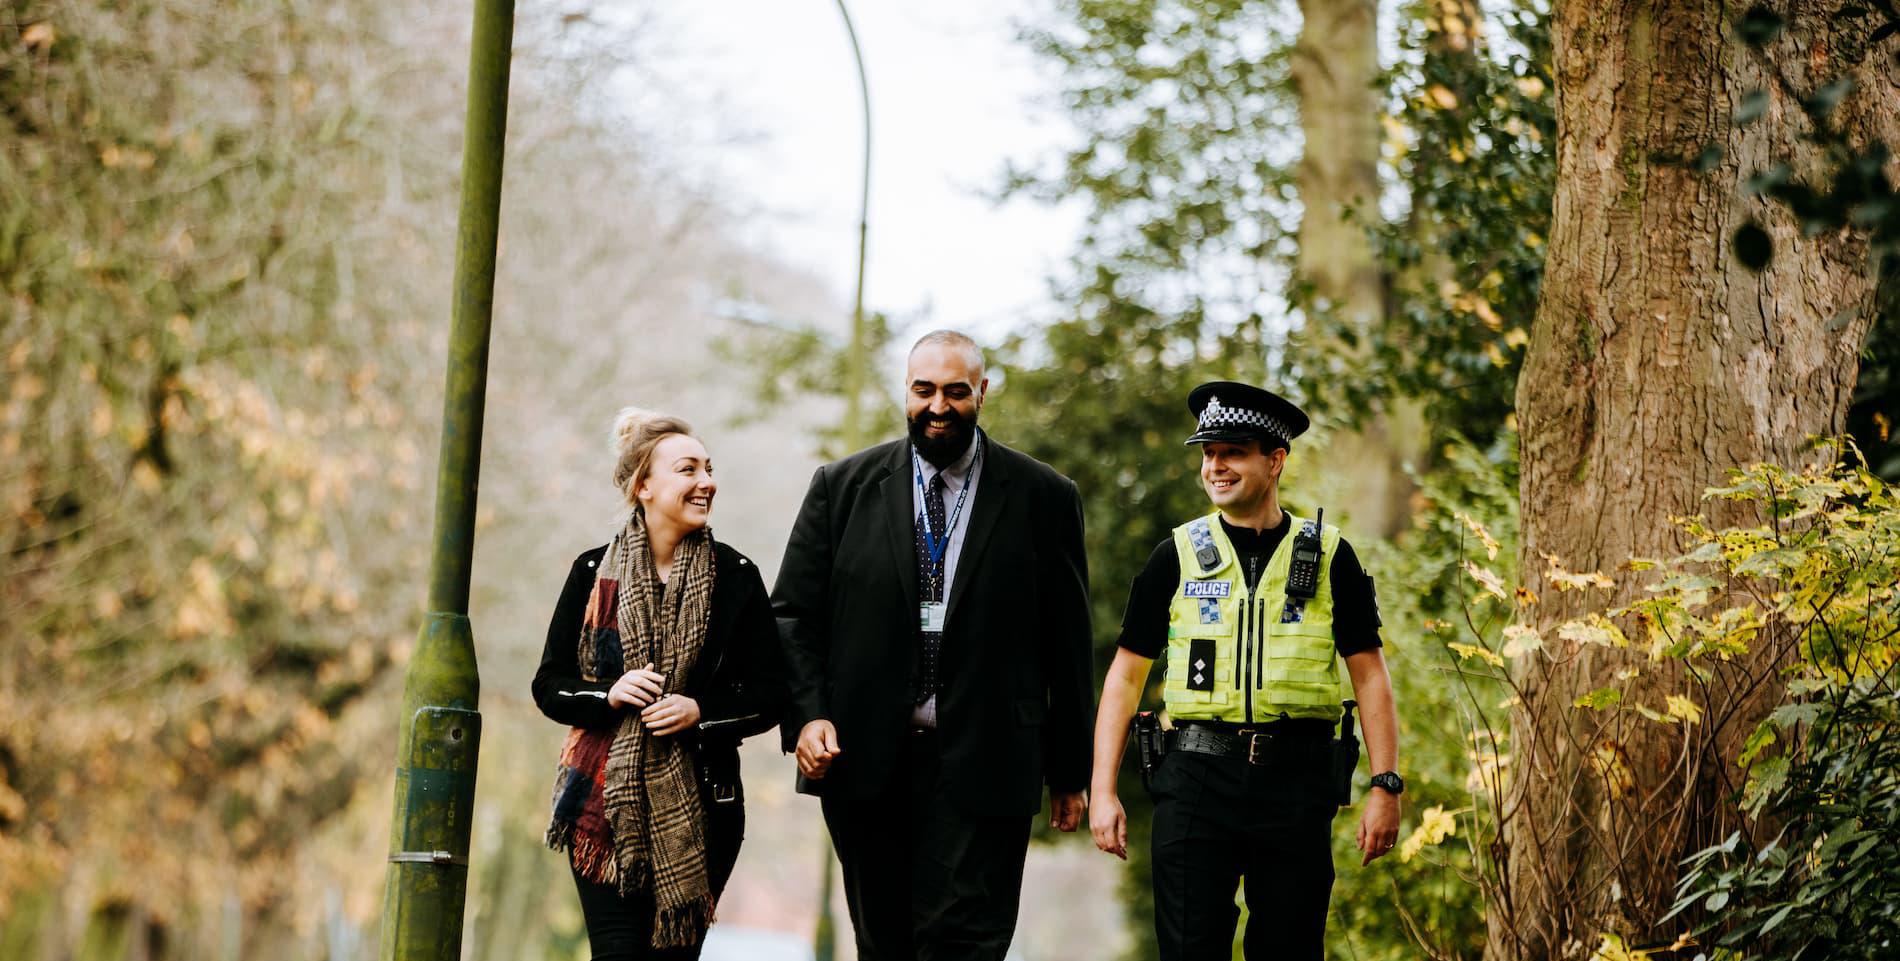 Criminology student Megan Witty with Humberside Police